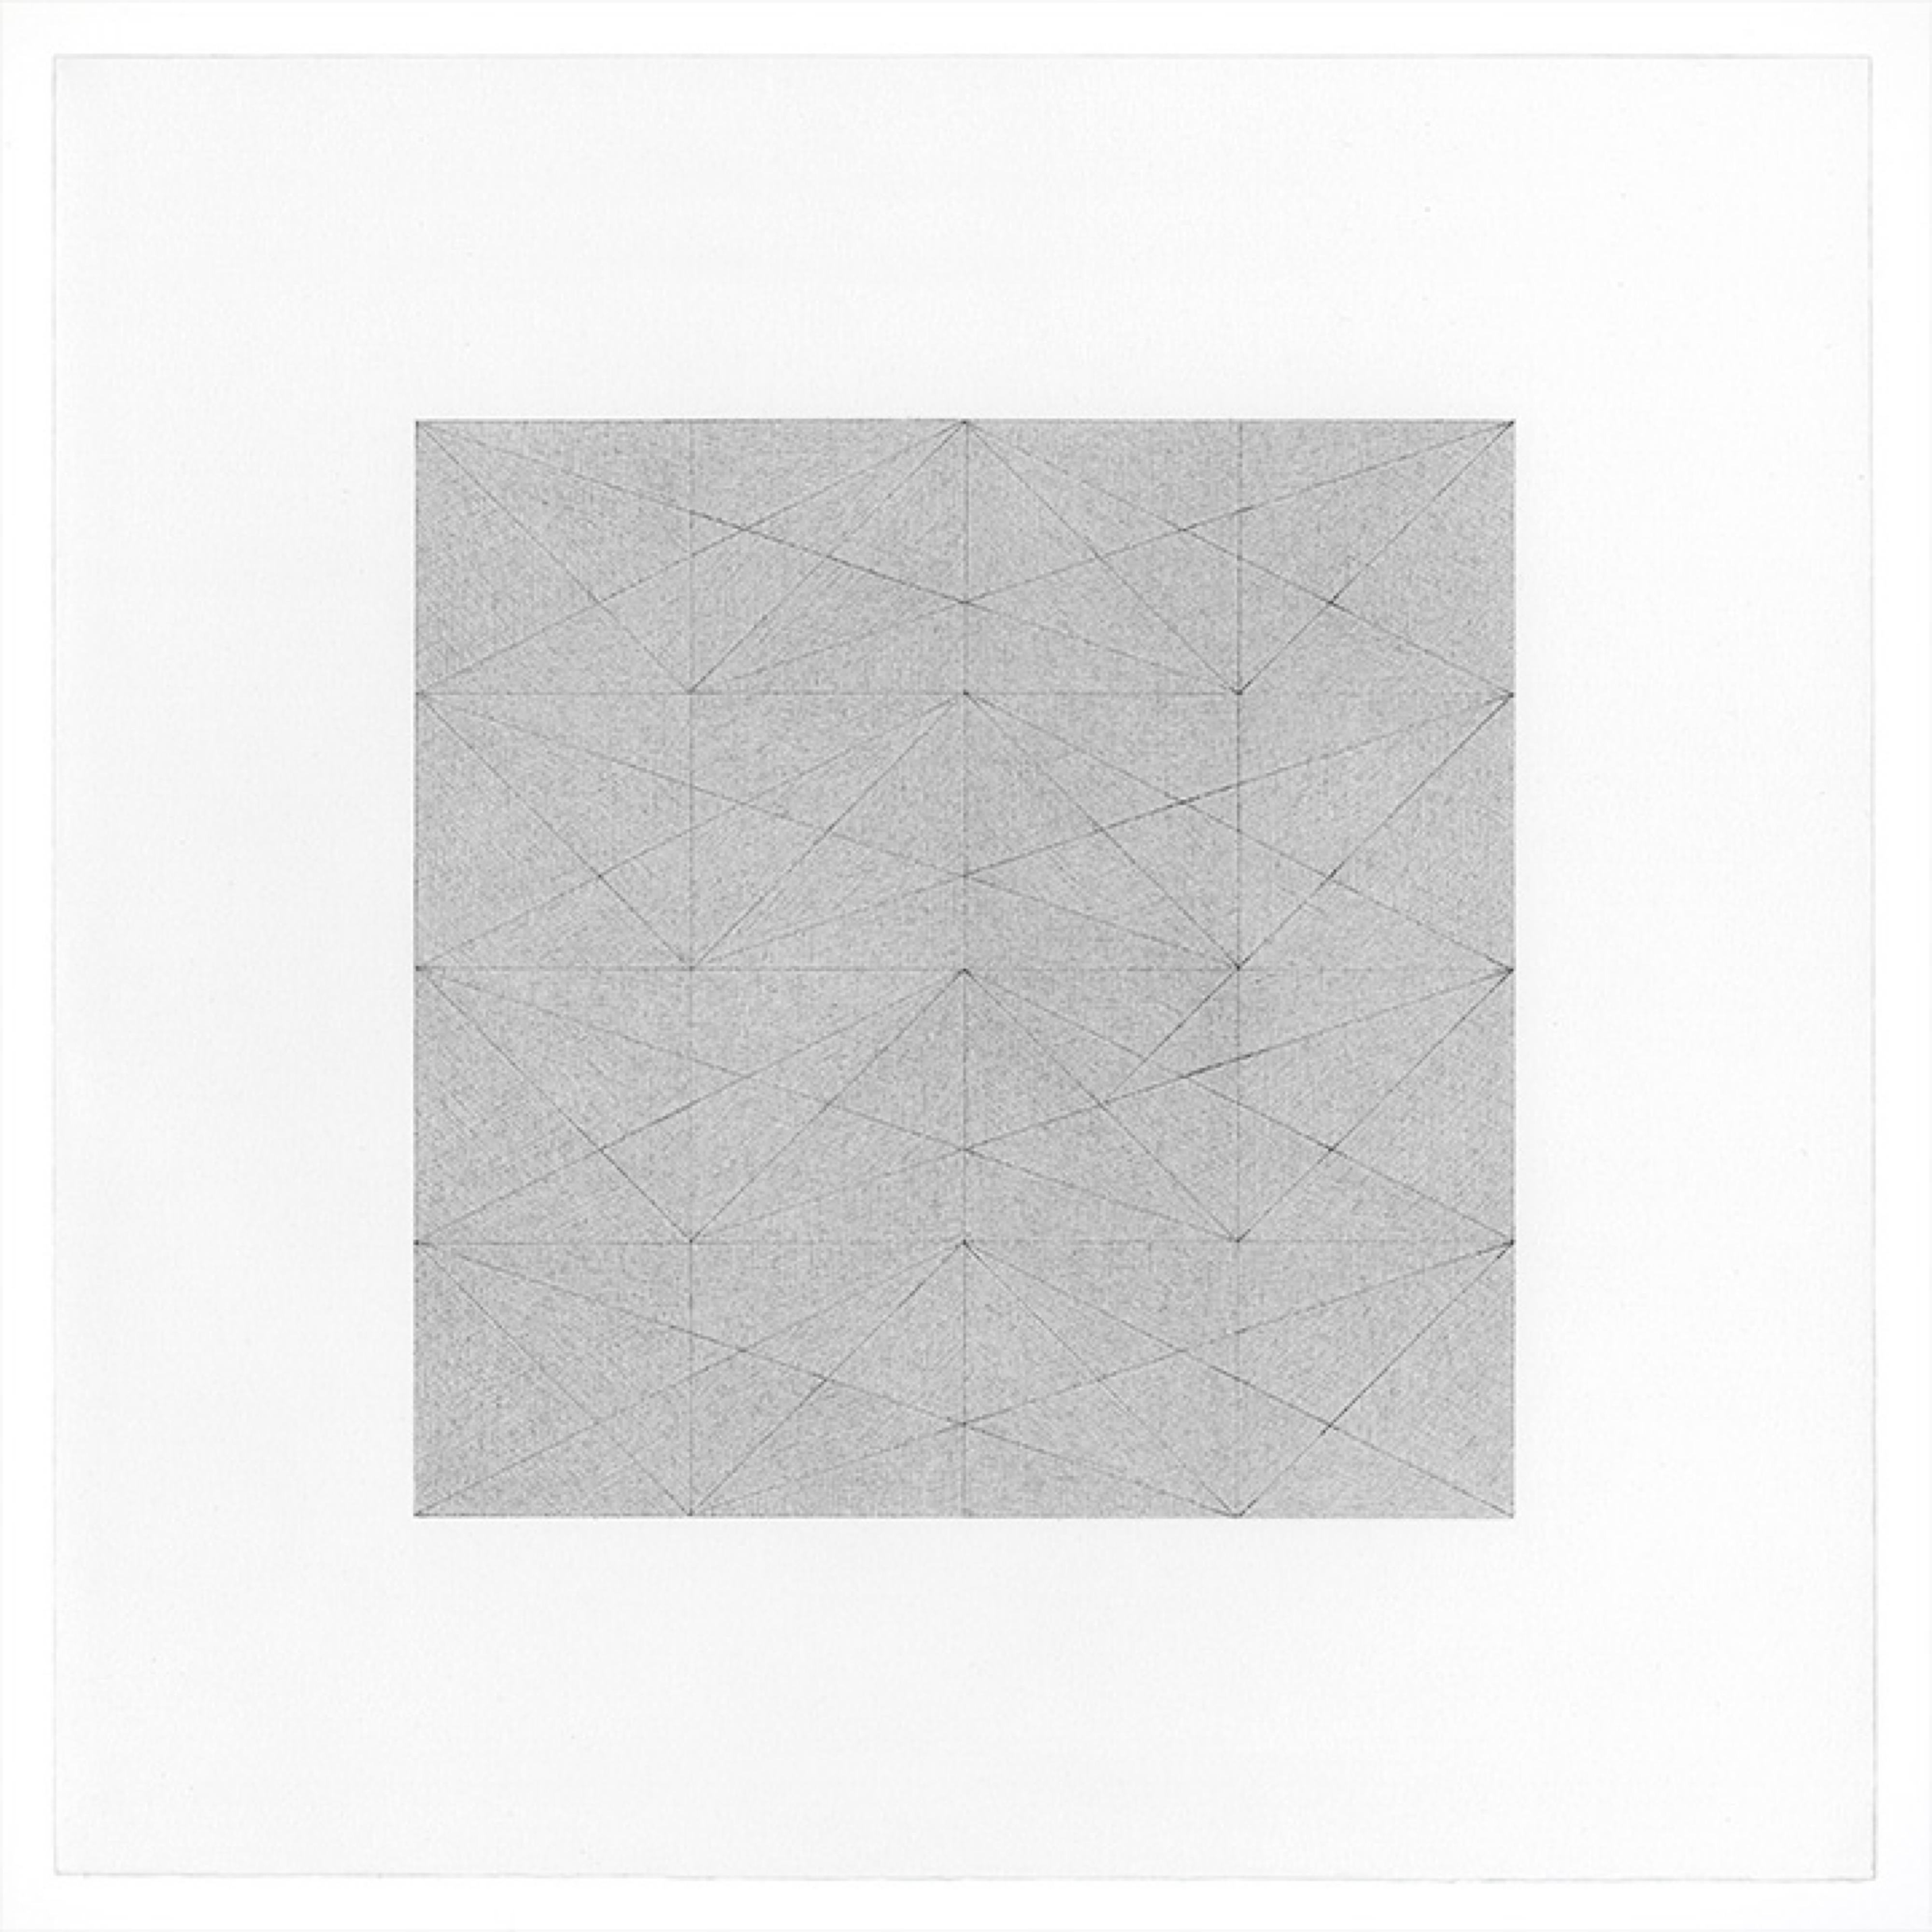 Patrick Carrara Graphite on Magni Drawings, Garden of Silence Series, 2009 In Excellent Condition For Sale In New York, NY